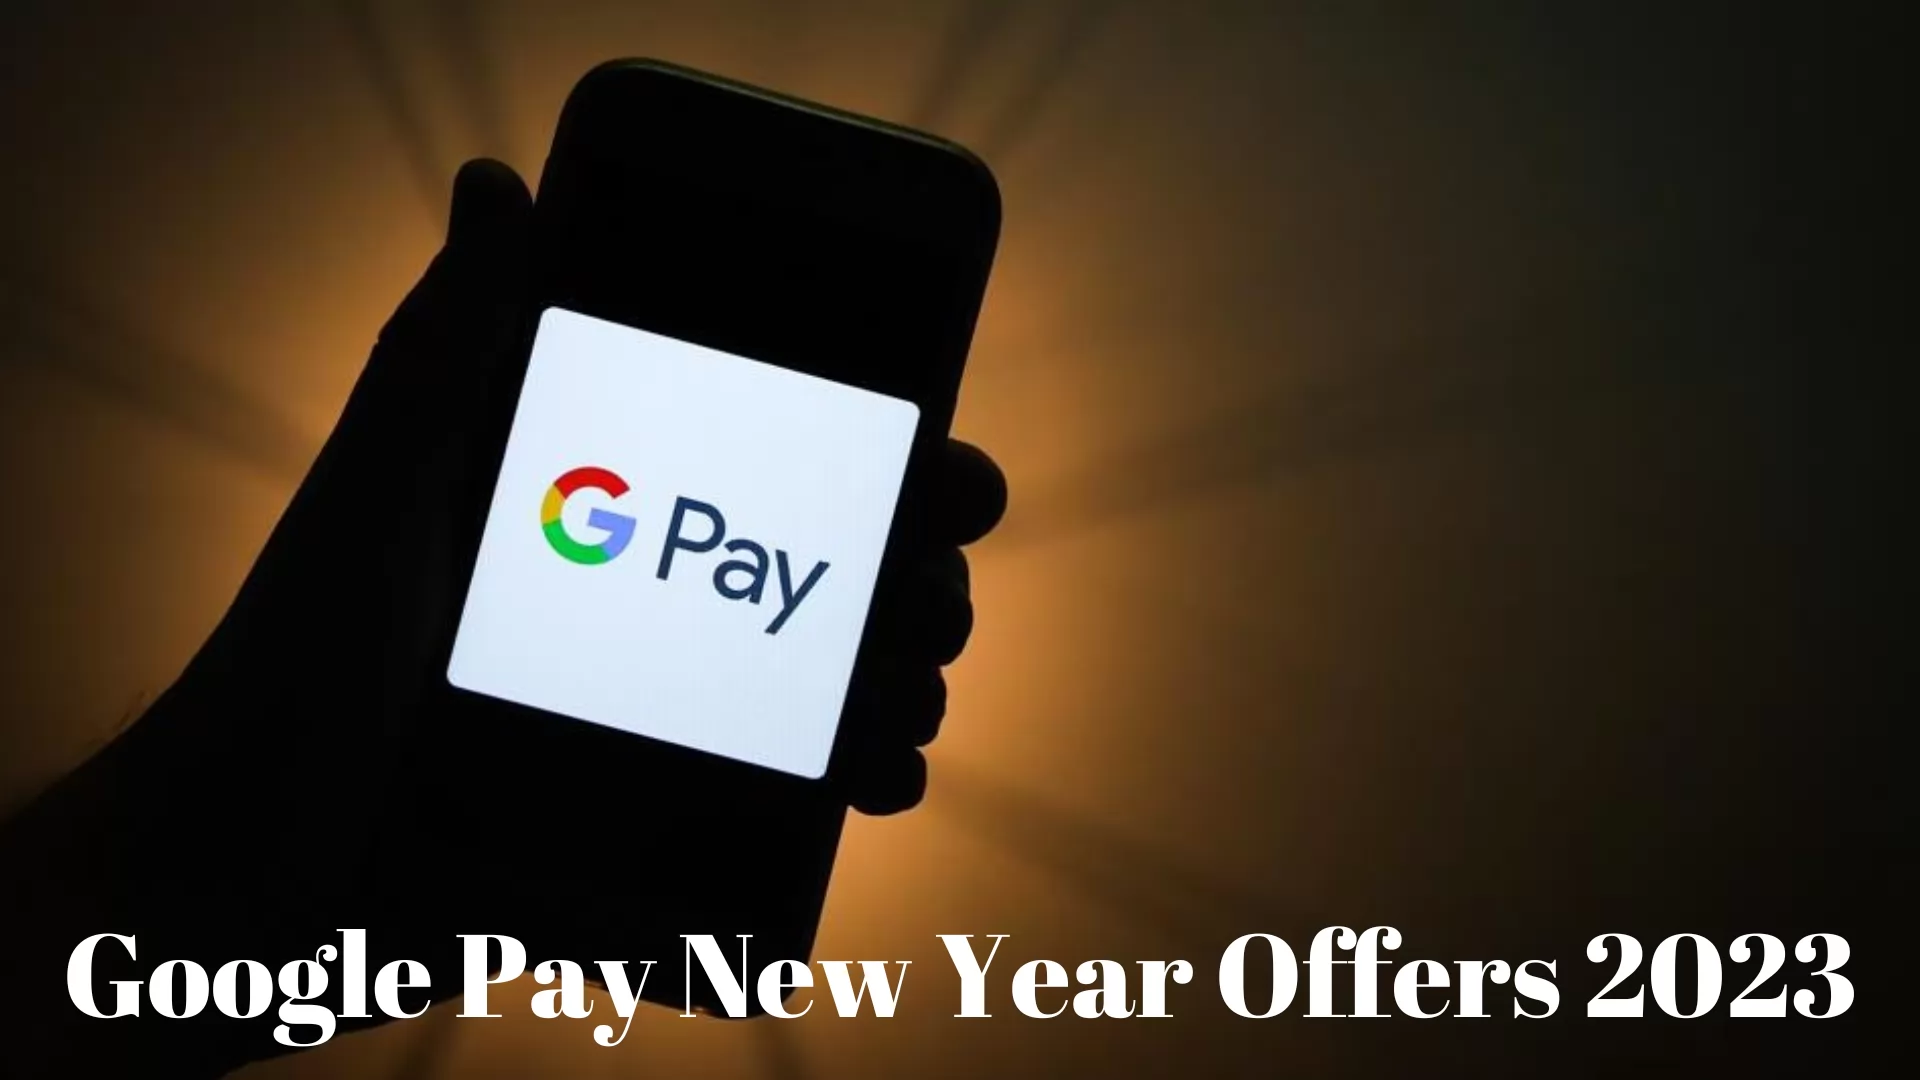 Google Pay New Year Offers 2023